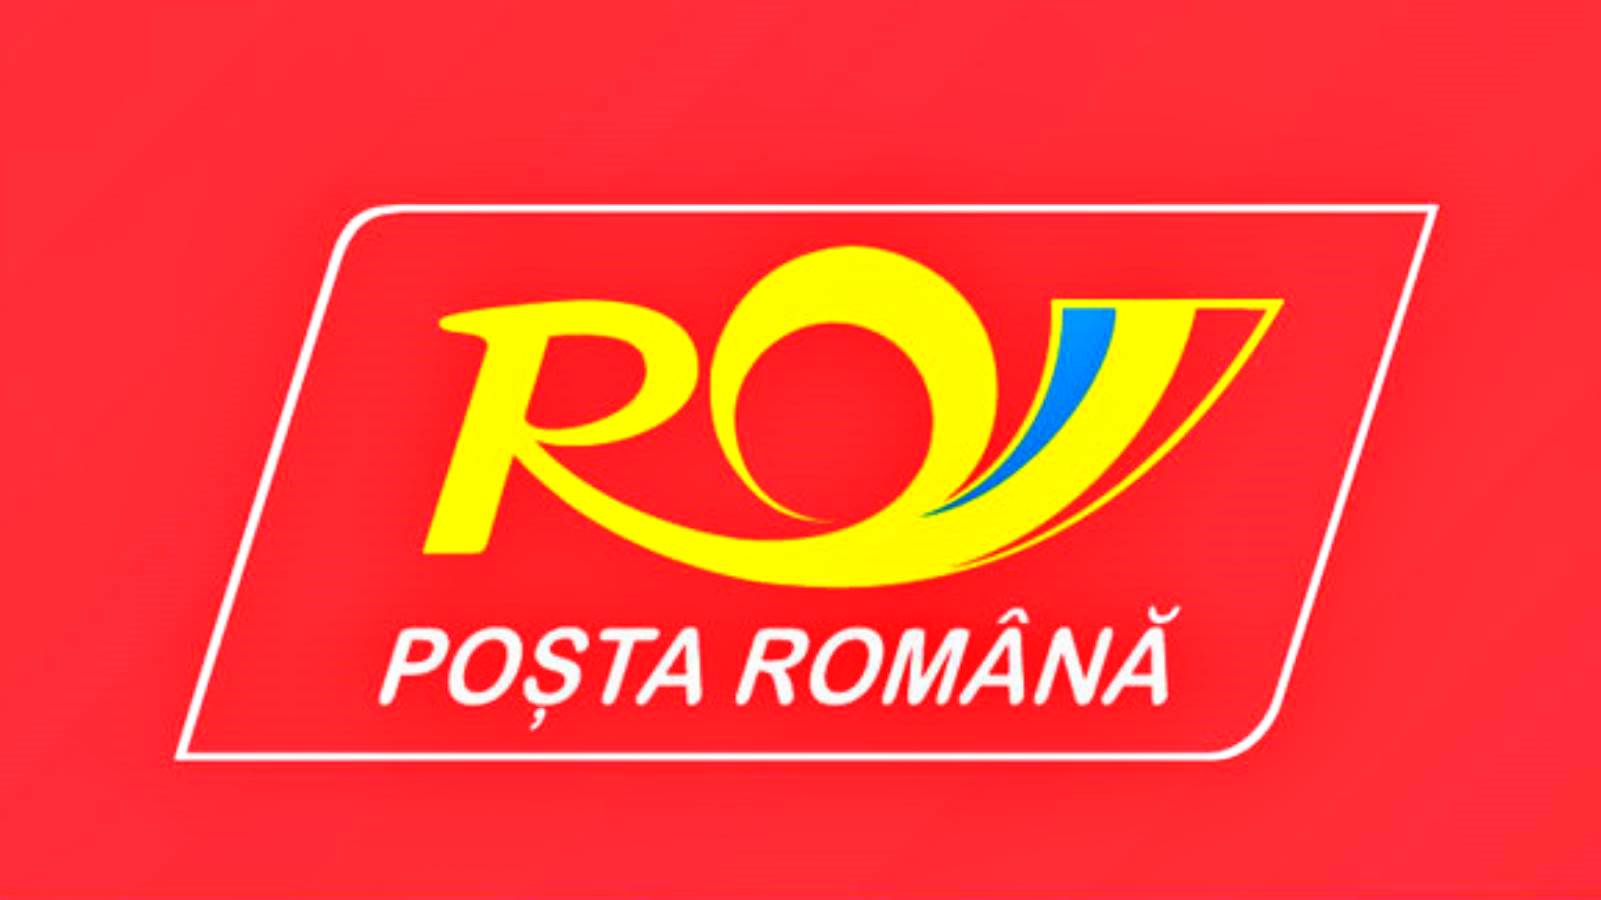 The decision of the Romanian Post was announced to MILLIONS of Romanians